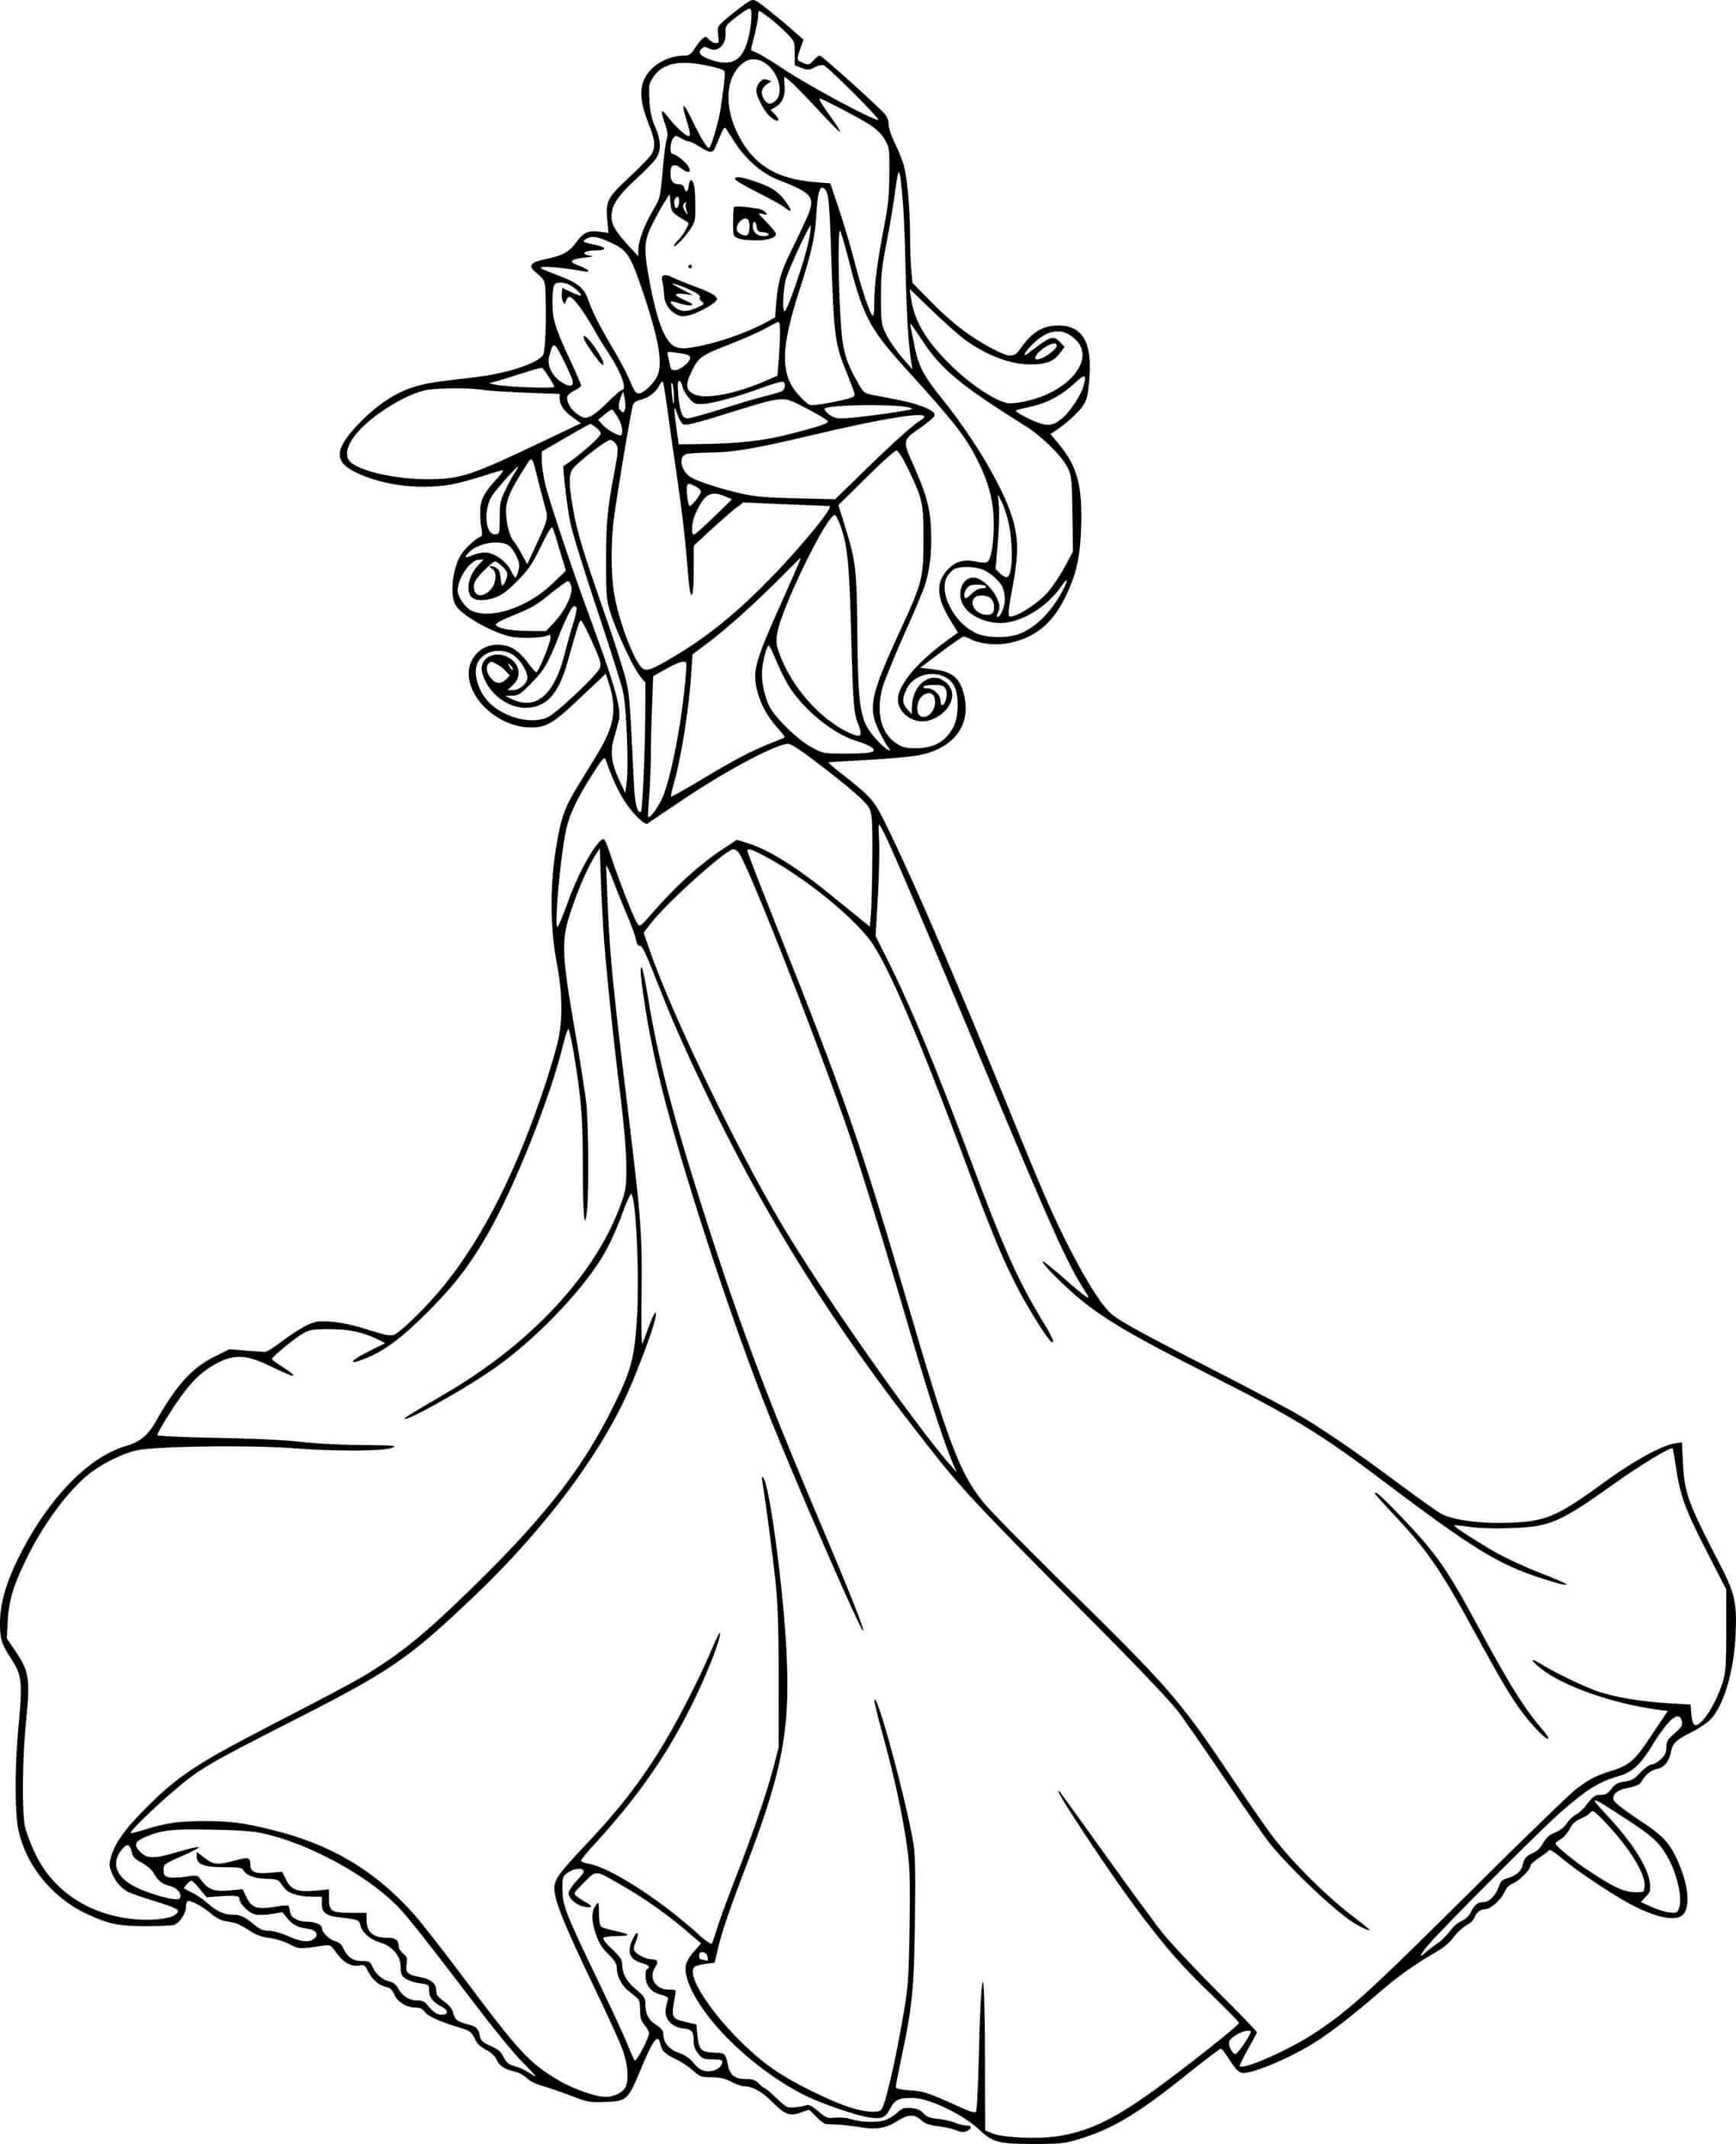 Aurora Running Disney Princess Coloring Pages   Coloring Cool